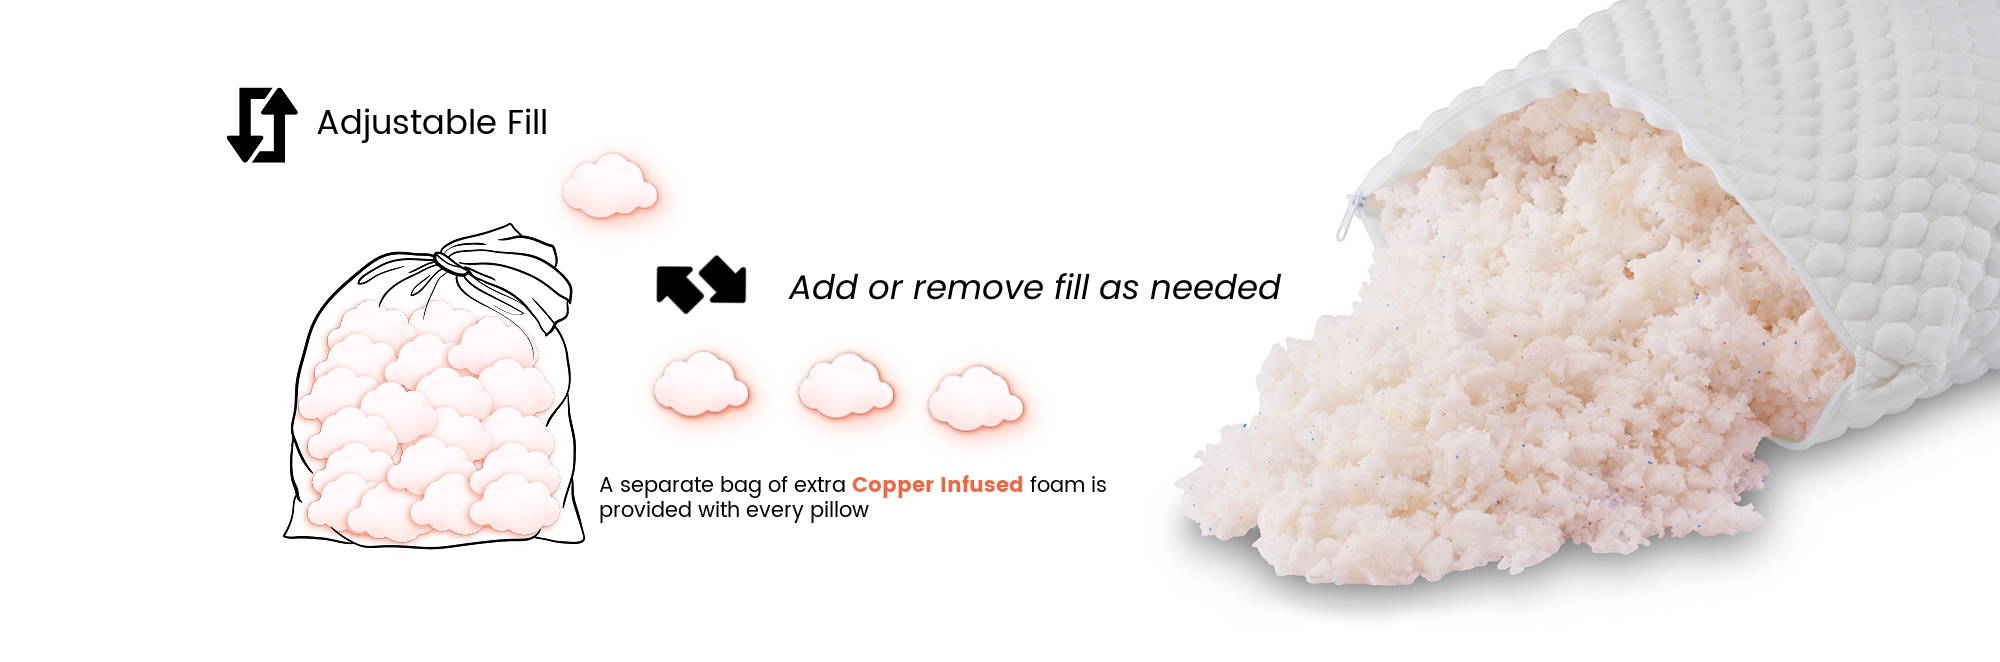 An open pillow with the adjustable fill copper gel memory foam spilling out and an extra bag of foam so you can add or remove fill as needed for the best comfort. A separate bag of fill comes with your pillow.